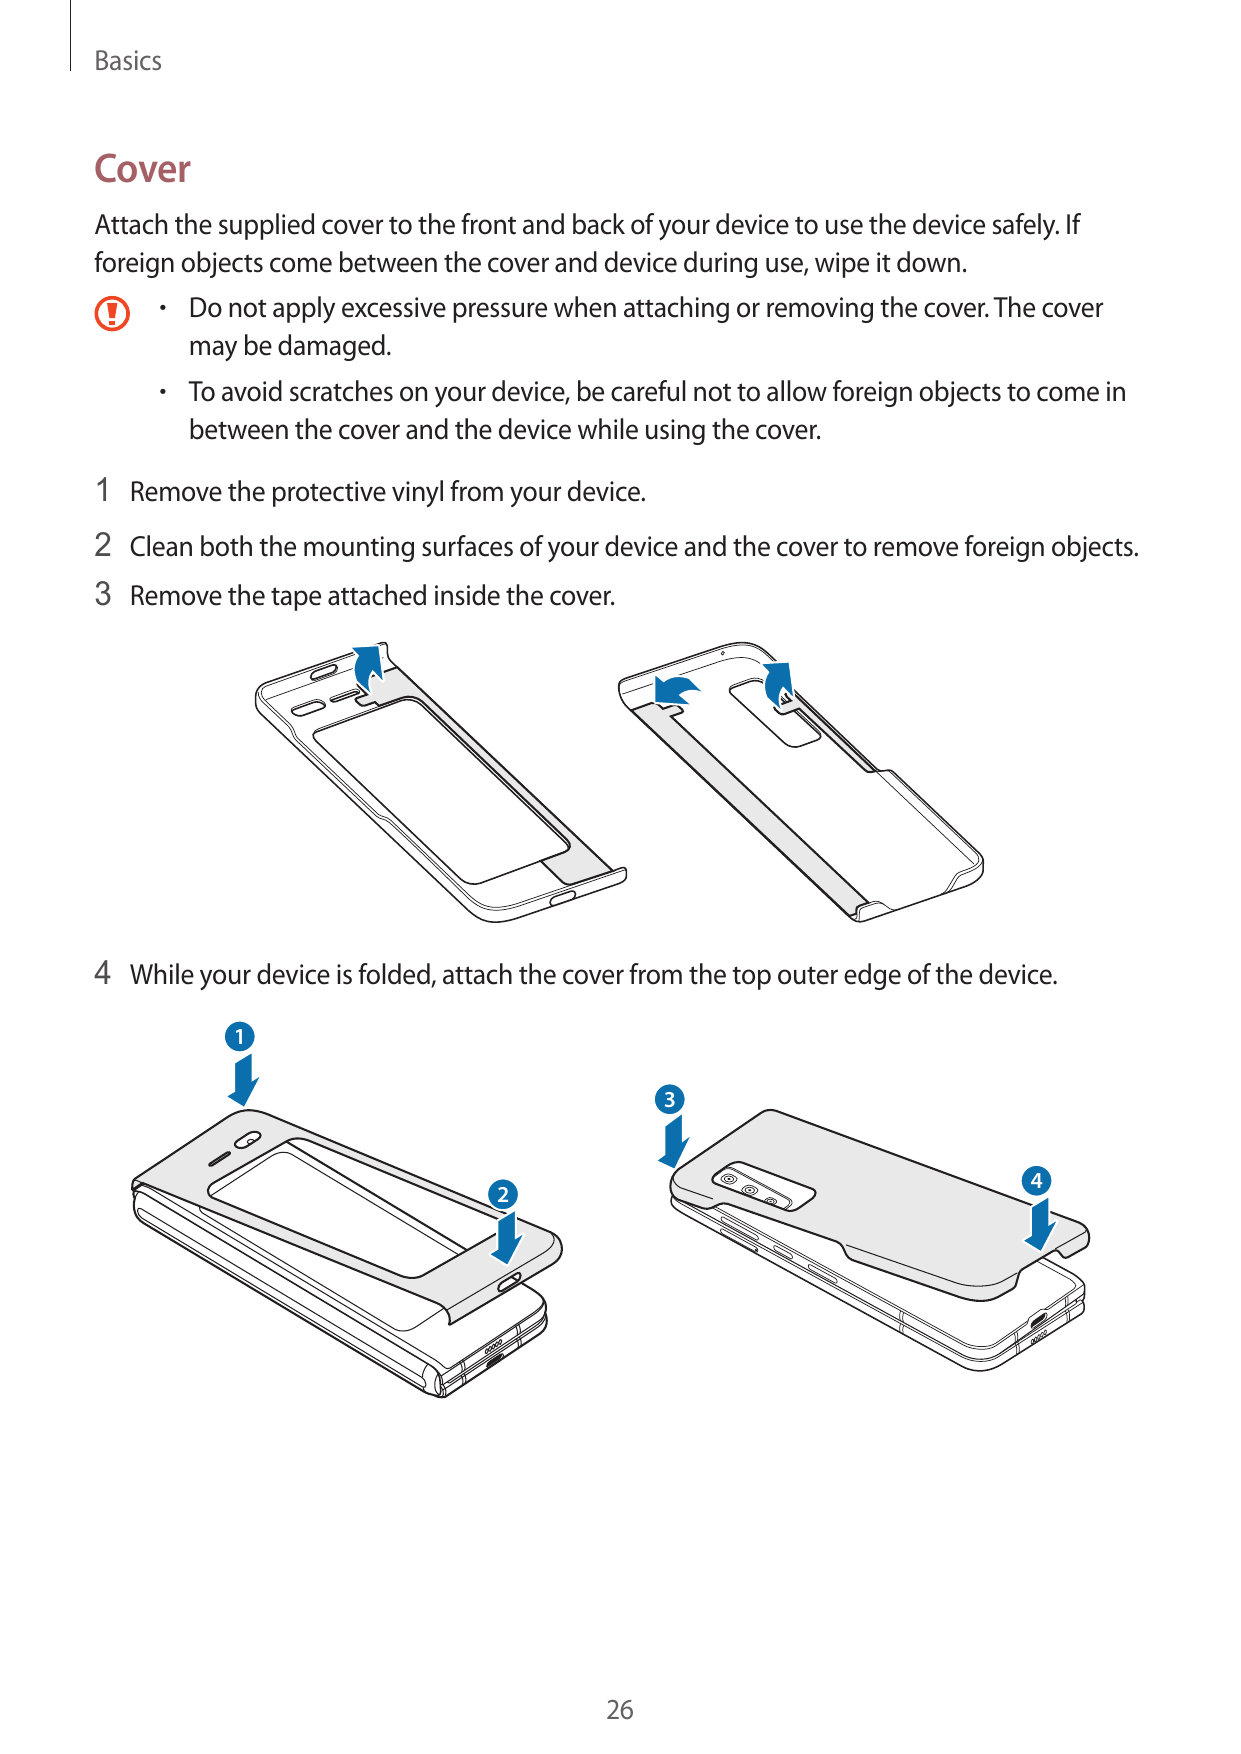 BasicsCoverAttach the supplied cover to the front and back of your device to use the device safely. Ifforeign objects come betwe